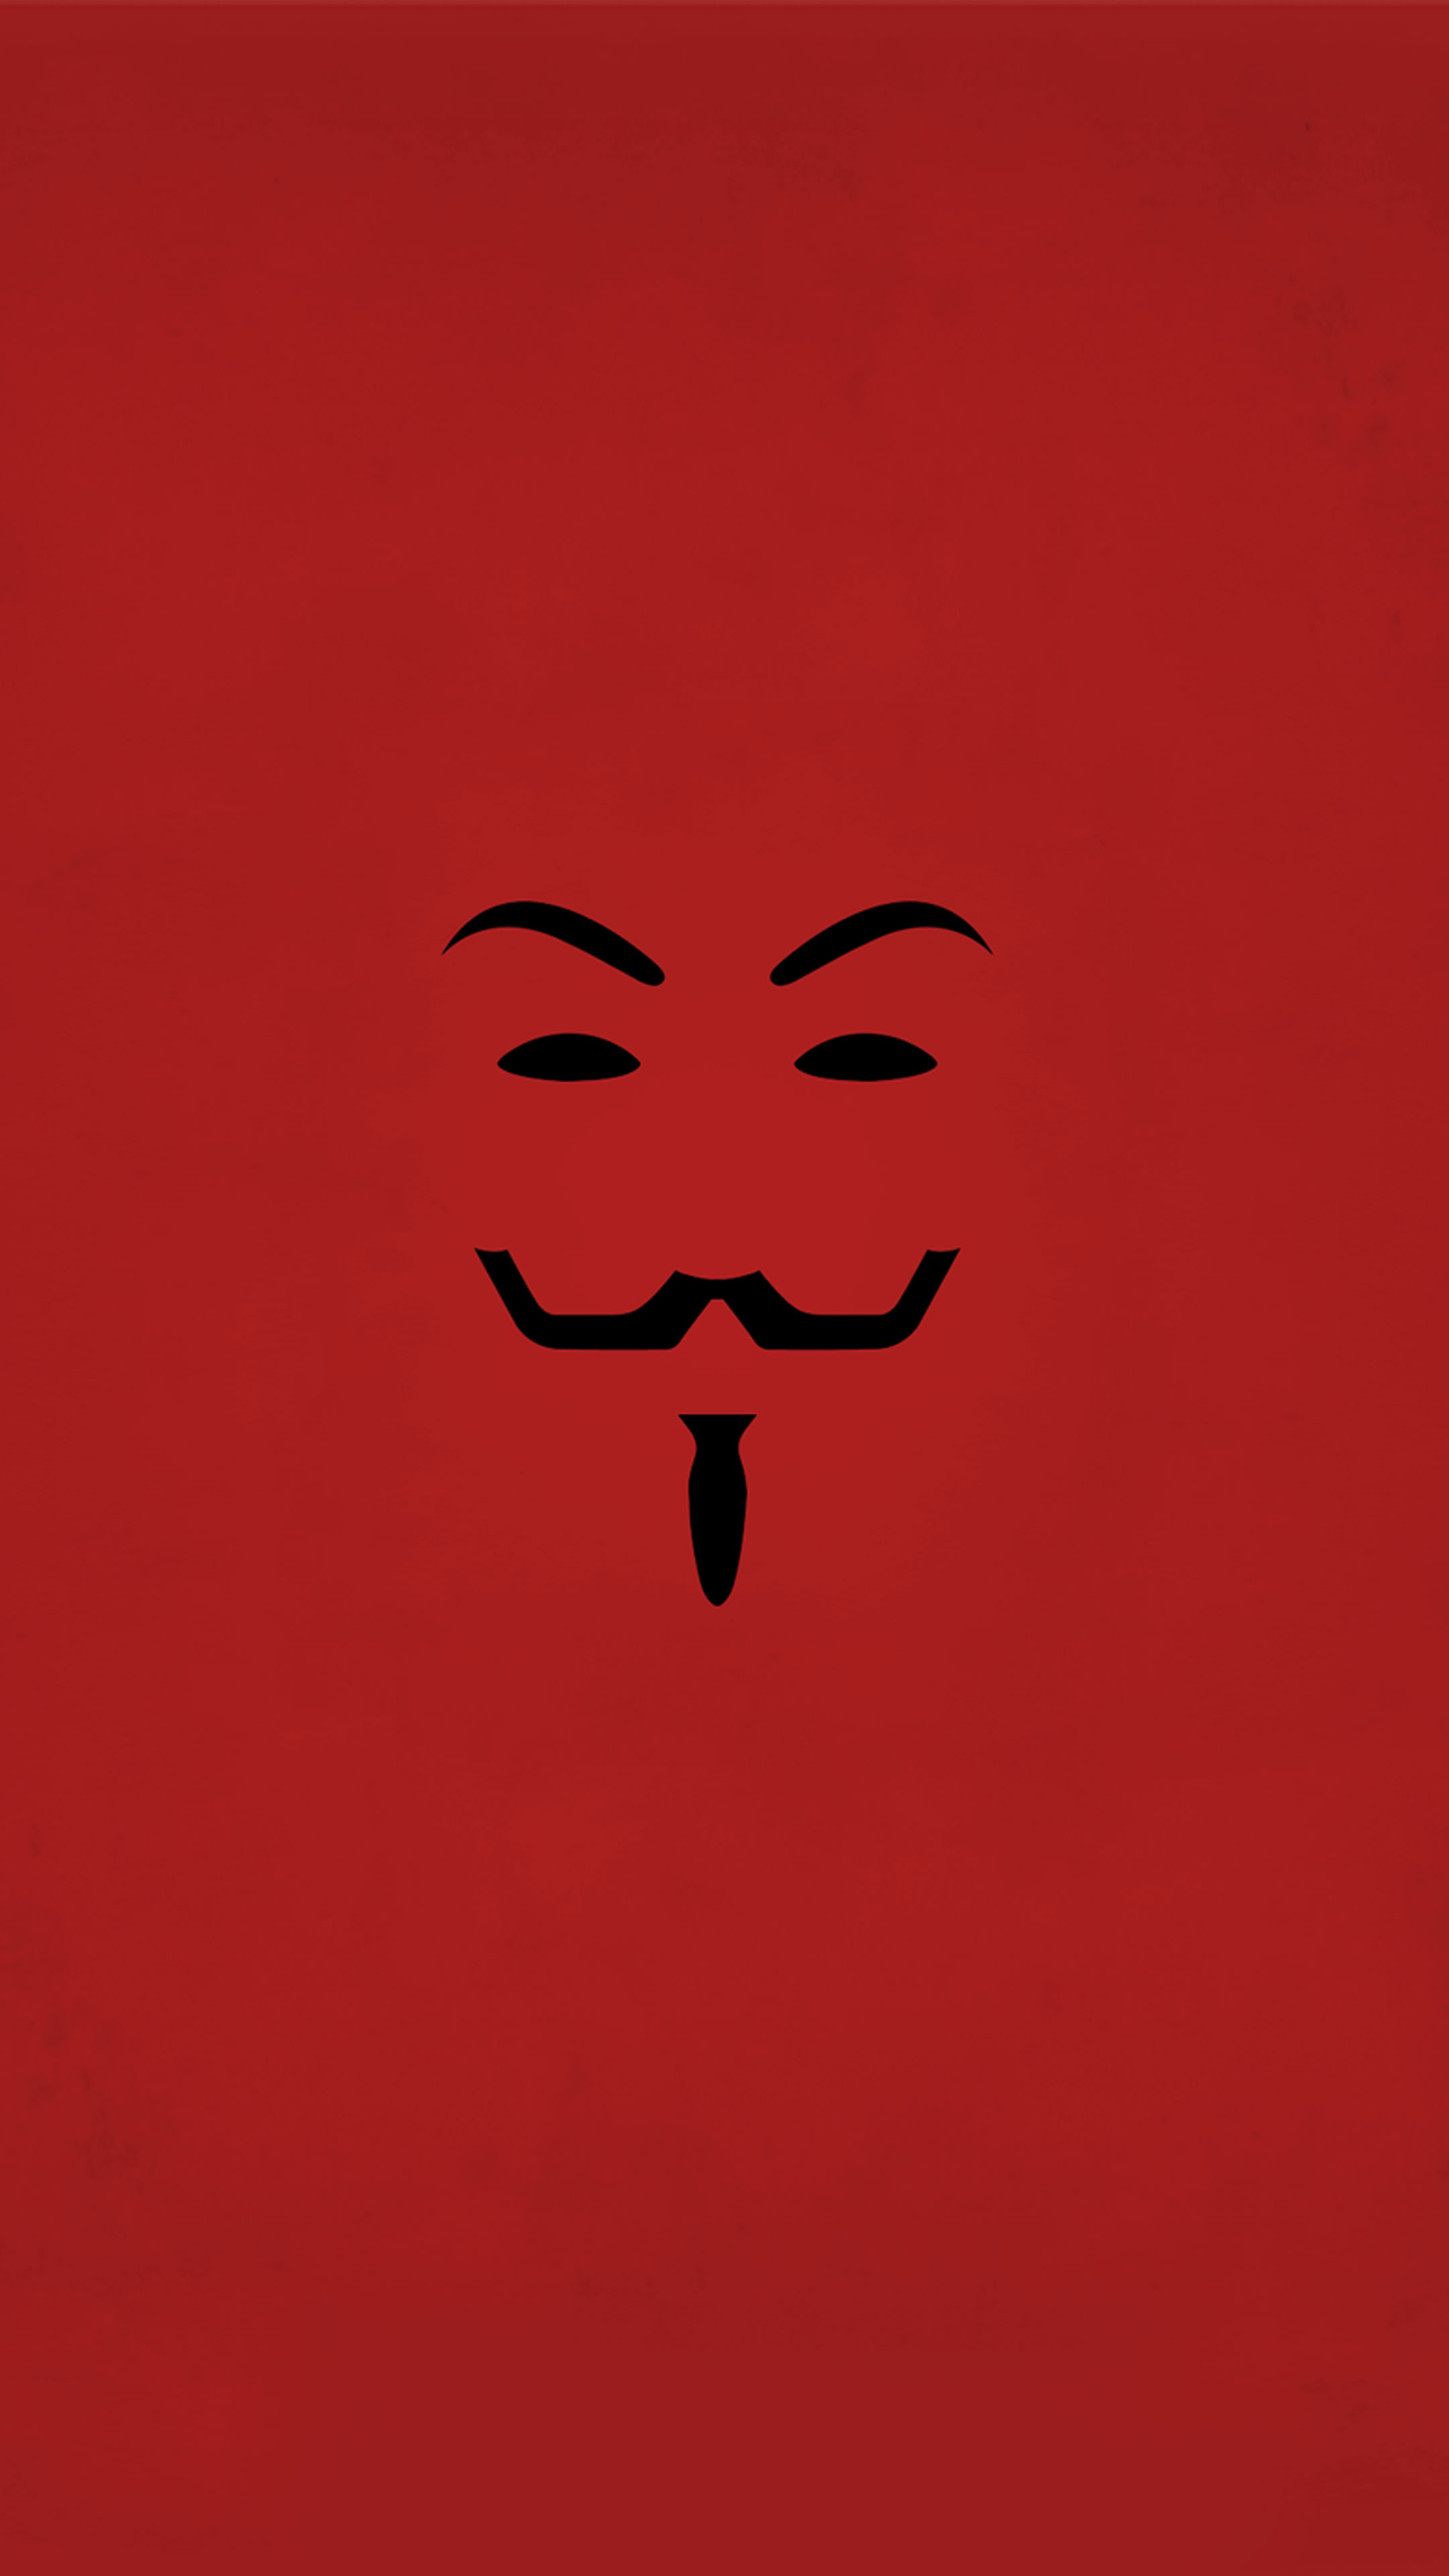 Guy Fawkes Mask: V for Vendetta, Used by the fictional F-Society in Mr. Robot. 2160x3840 4K Wallpaper.